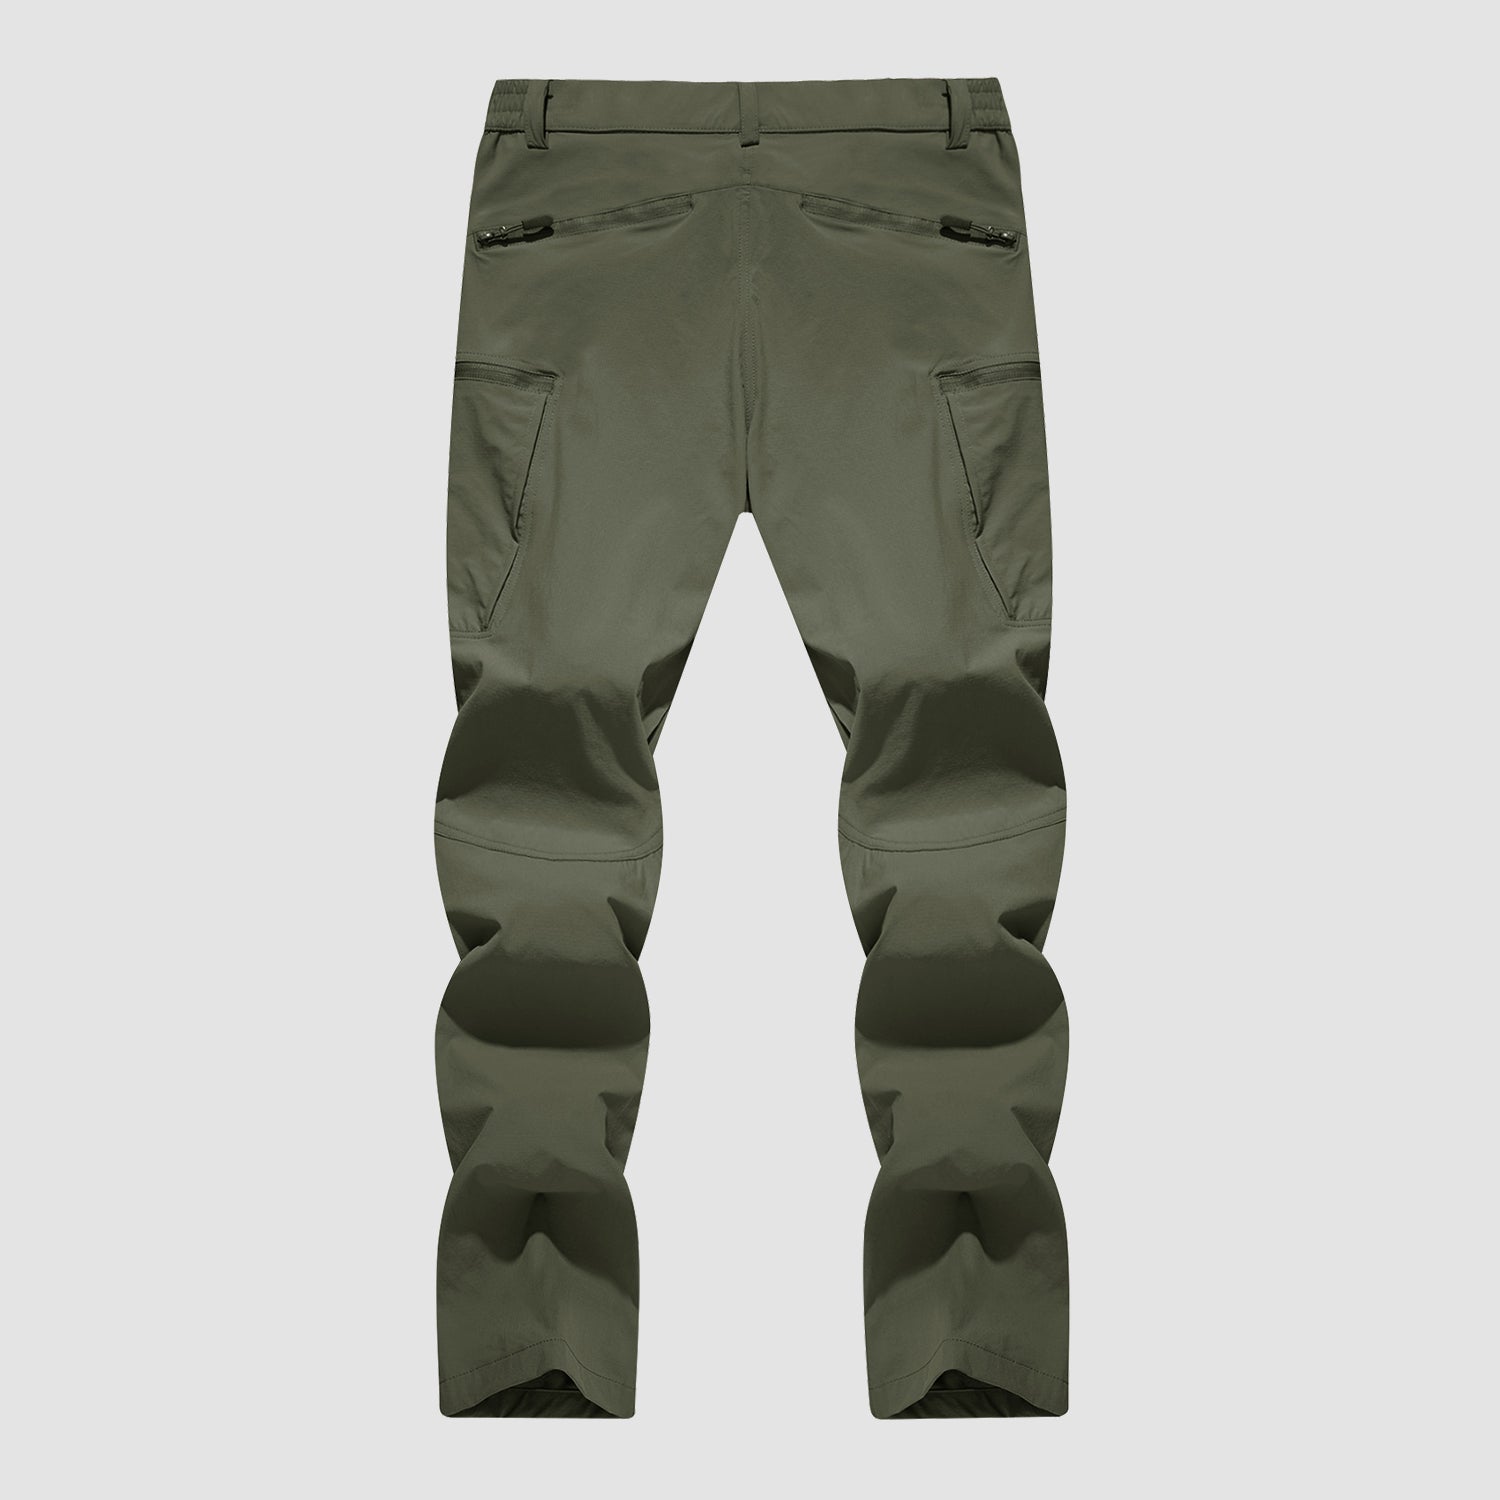 Men's Hiking Pants Water Repellent Cargo Pants with 8 Pockets Ripstop Lightweight Workout Pants